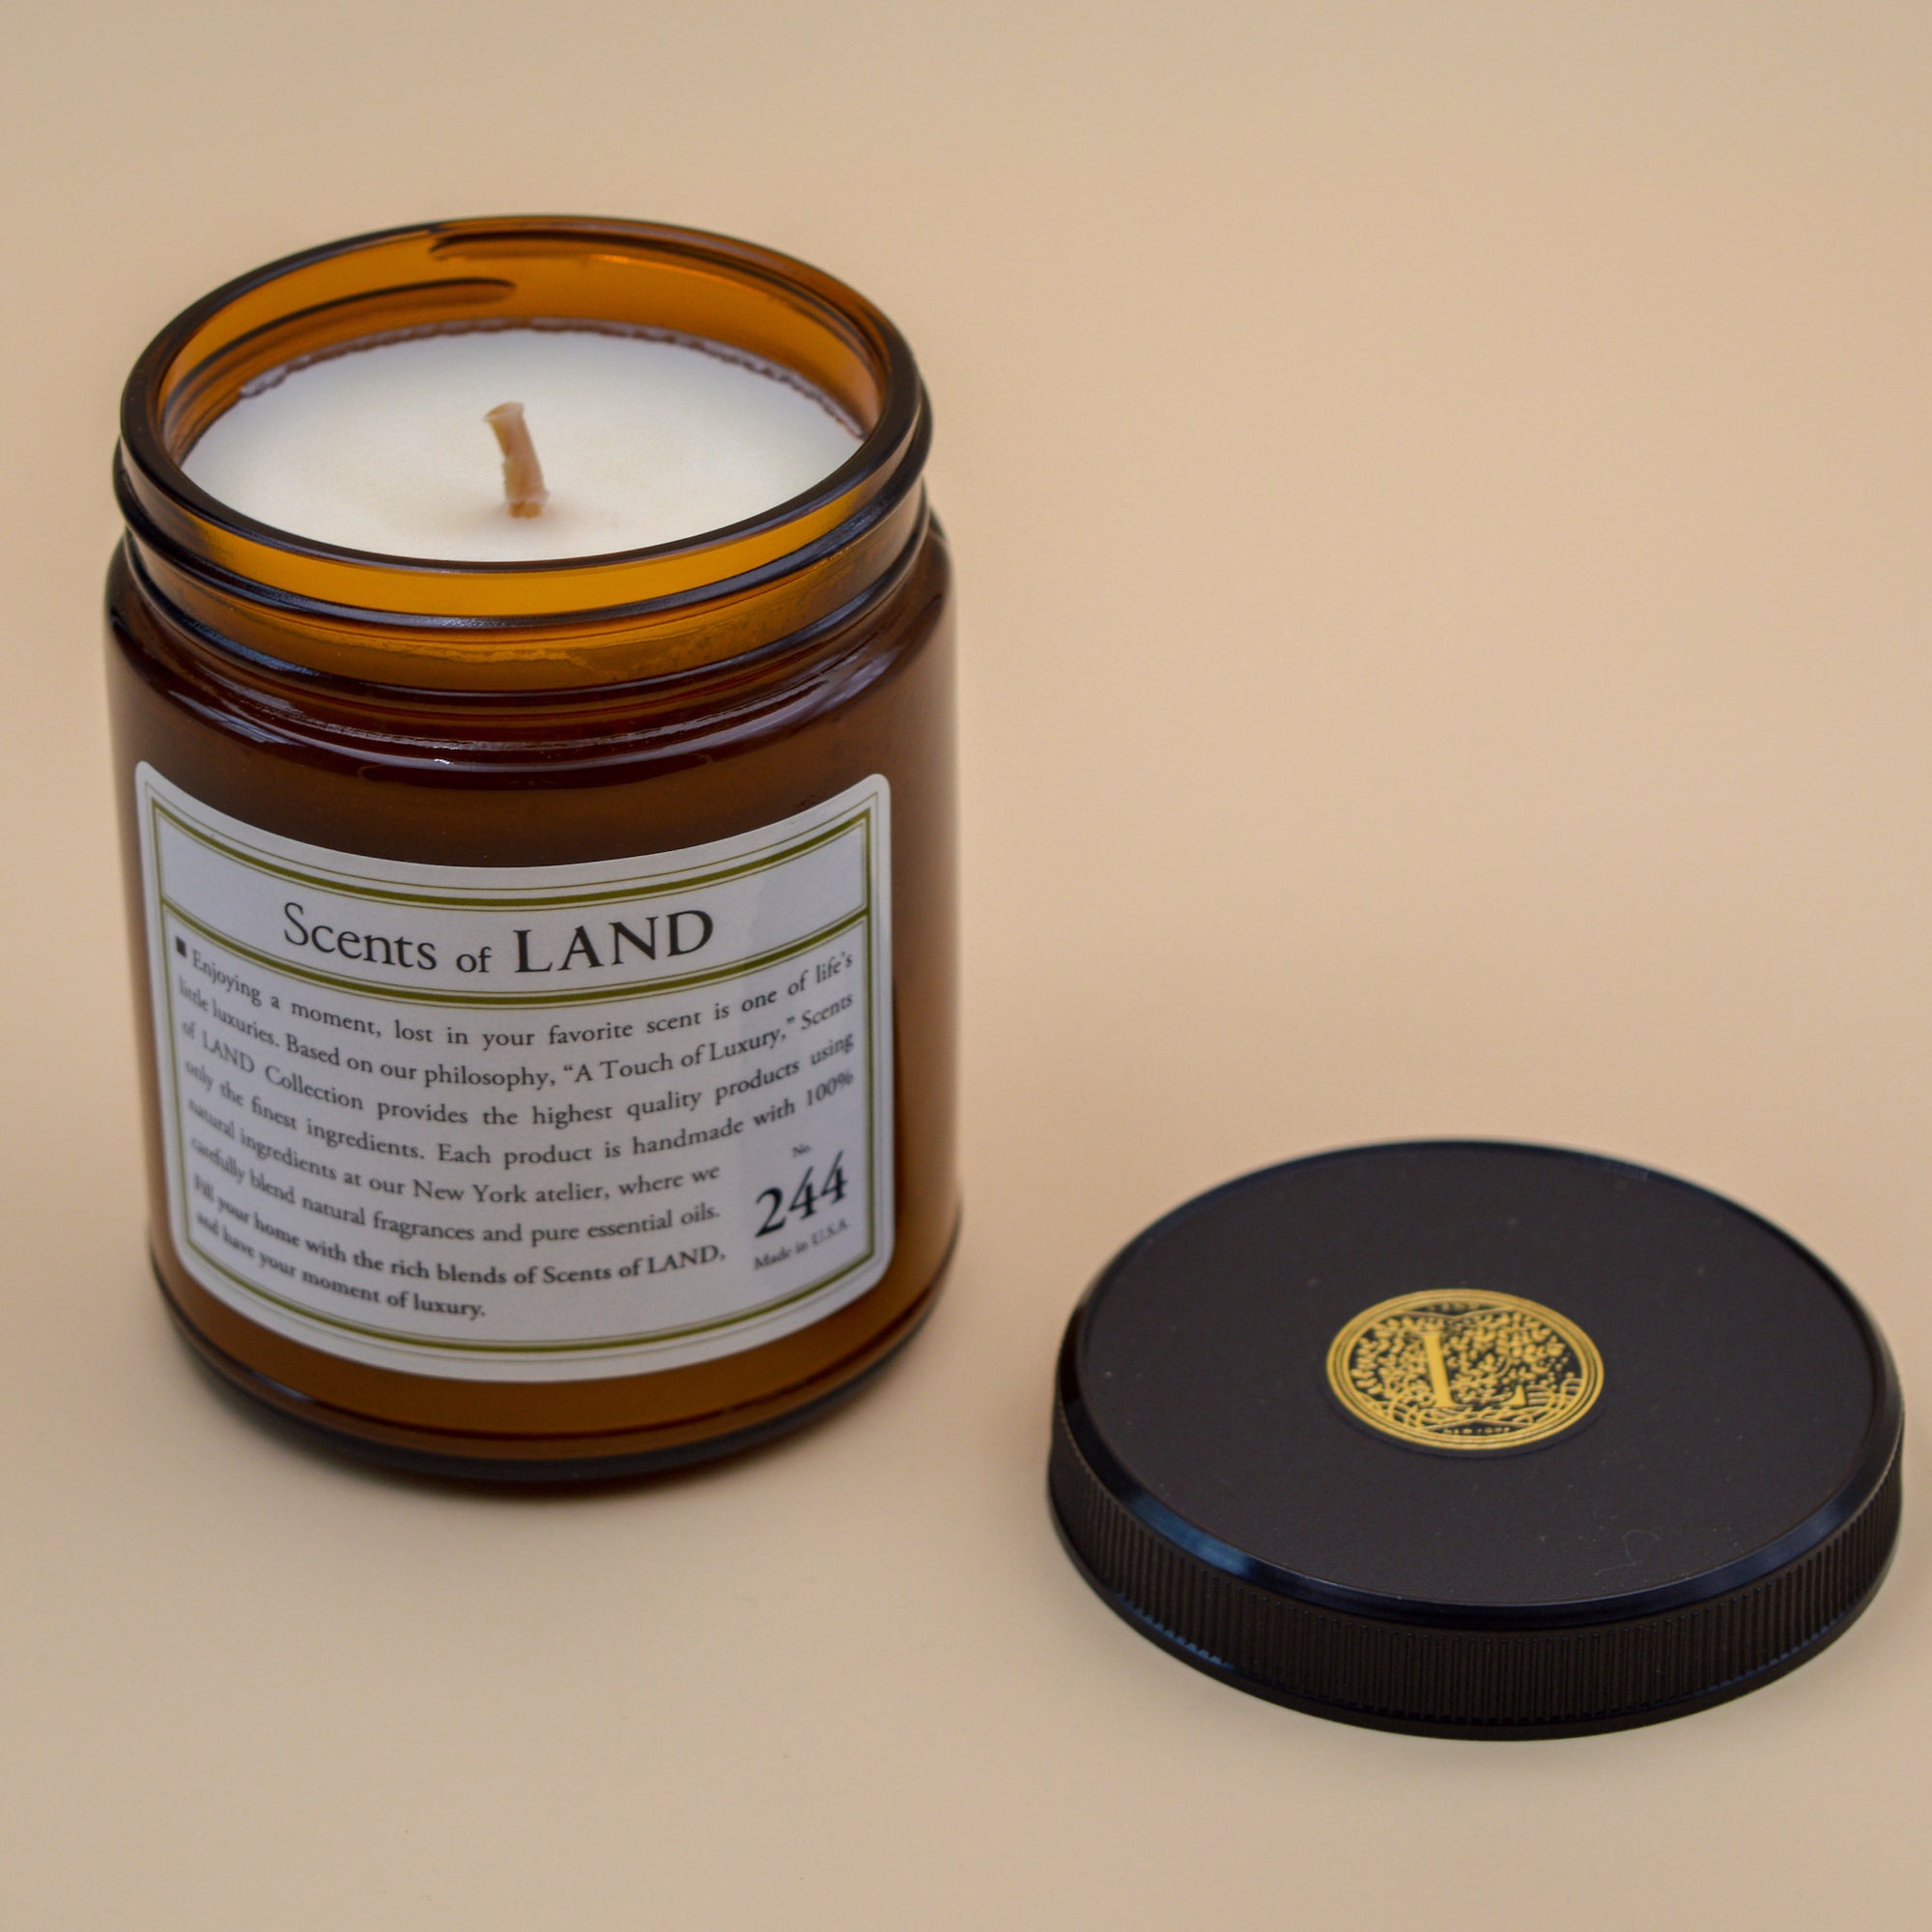 Scents of Land 244 Wisteria Candle